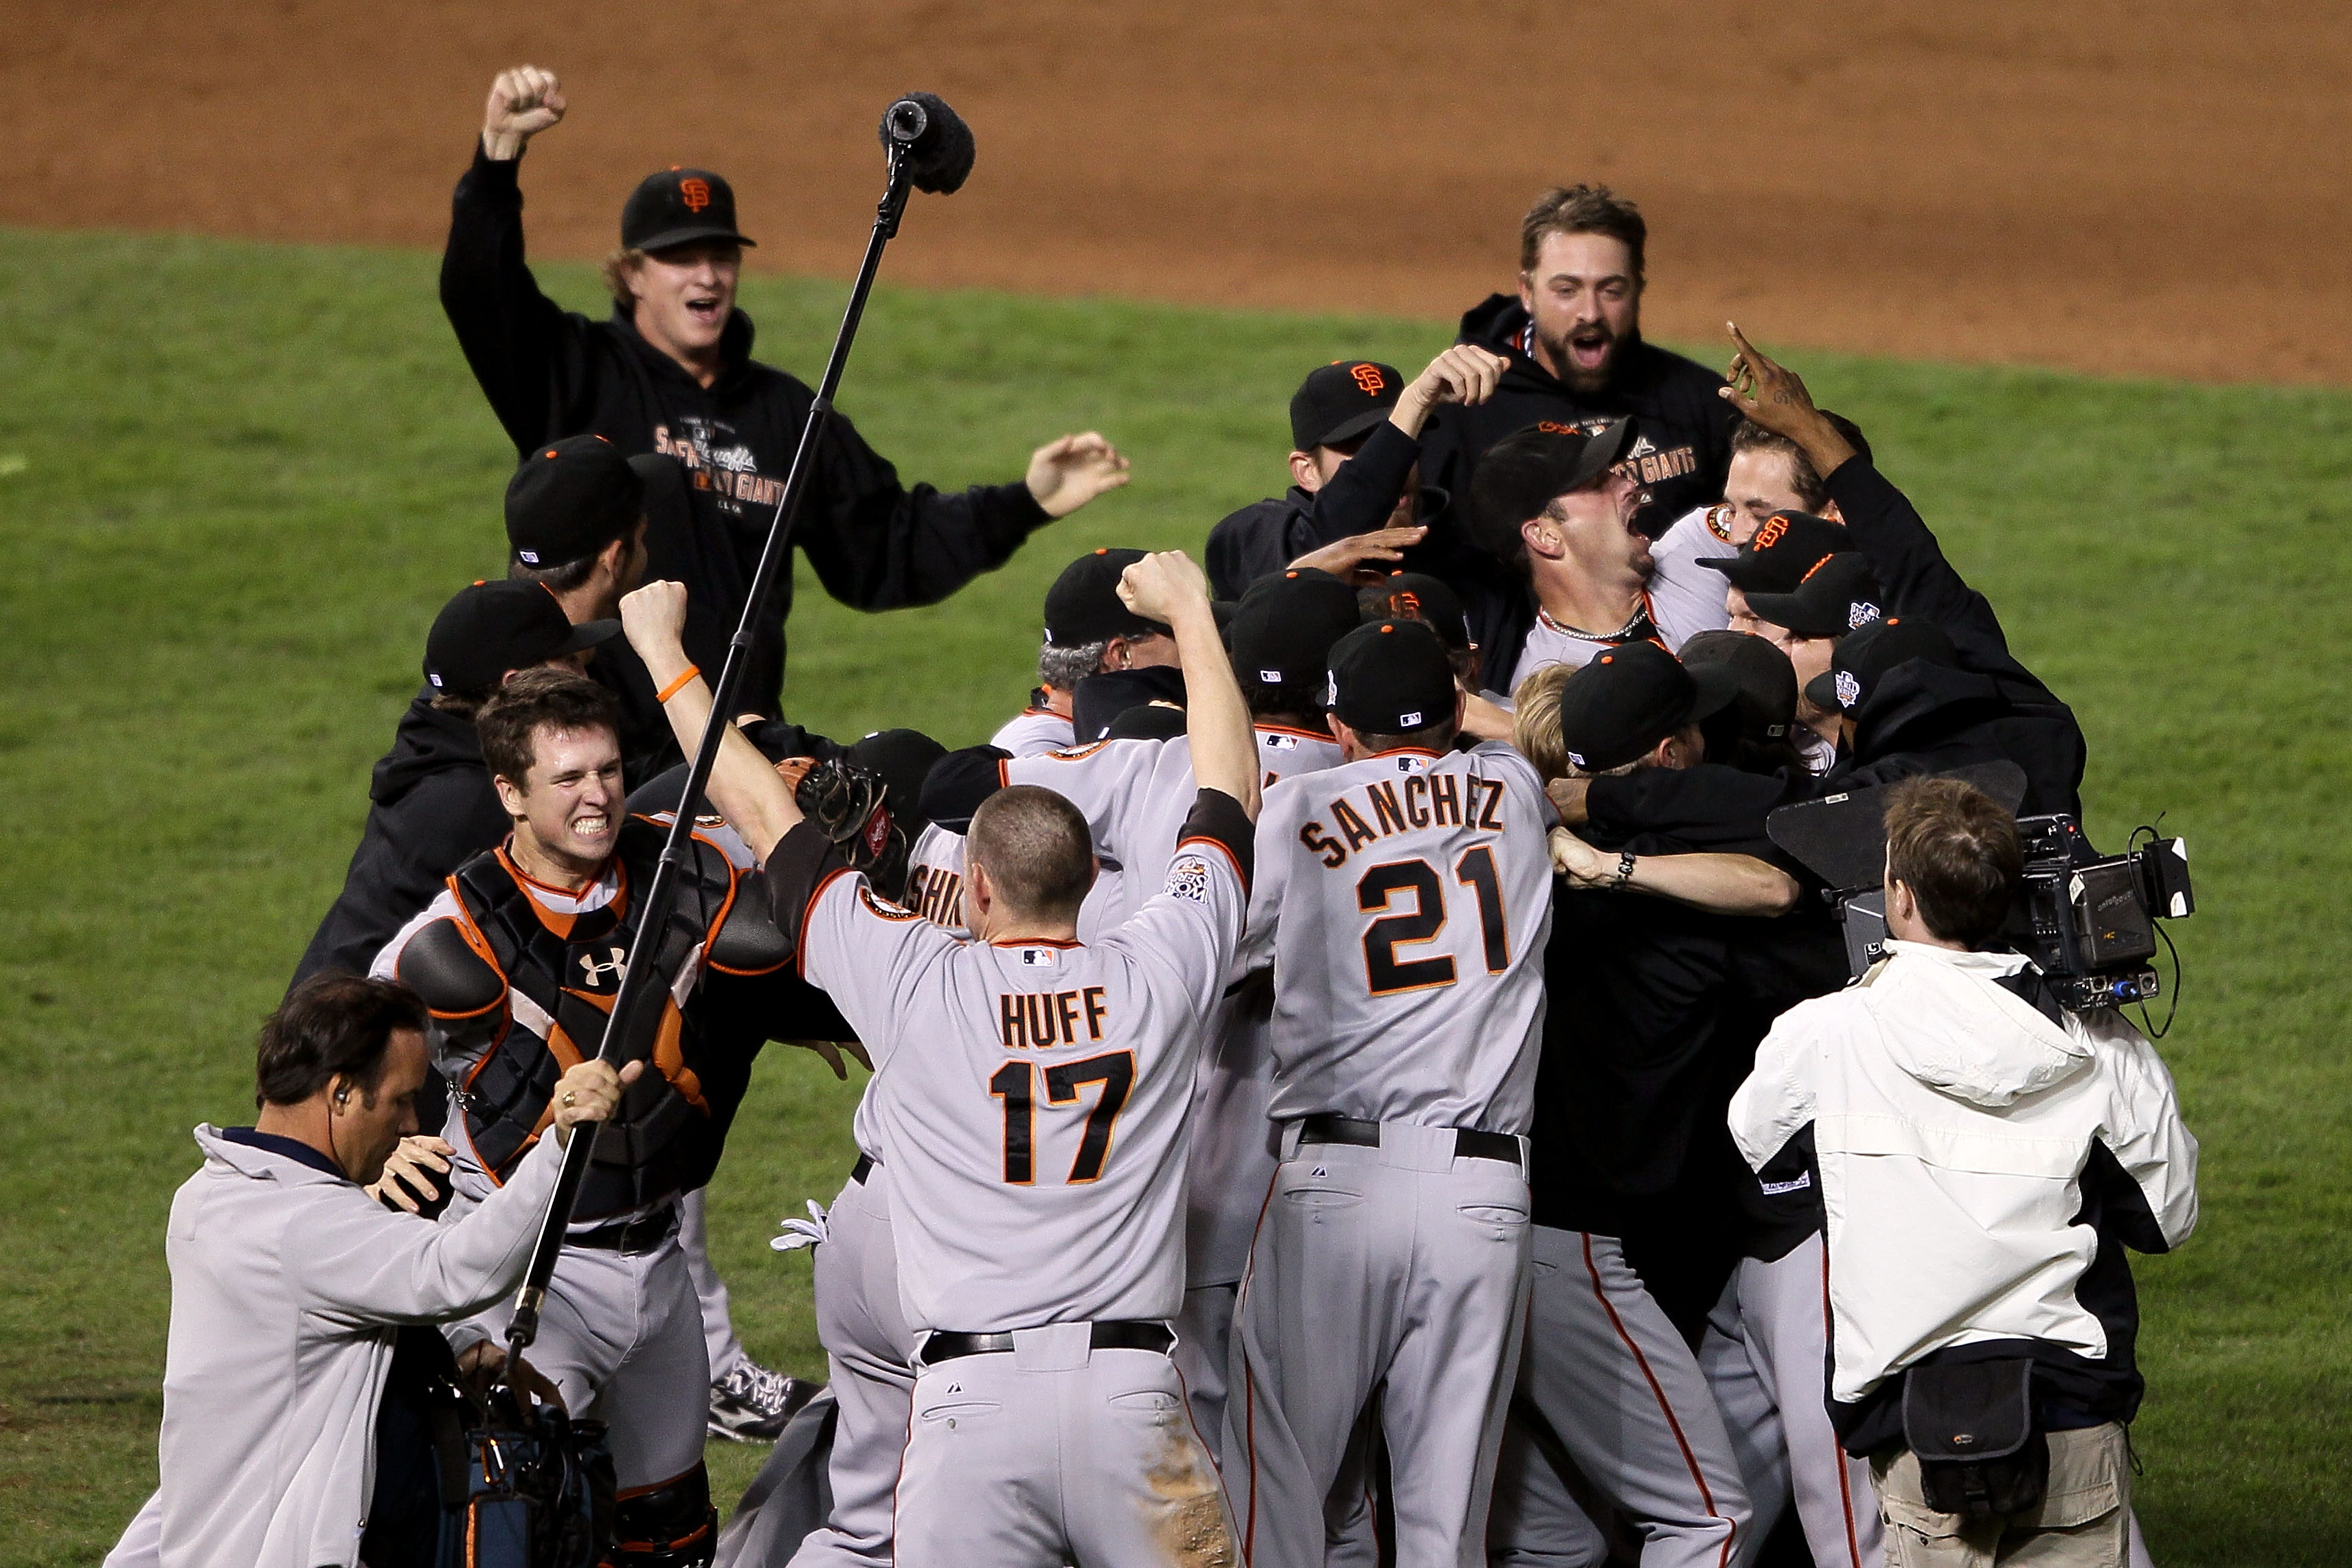 The Best World Series since 1990: Where Does 2010 Rank?